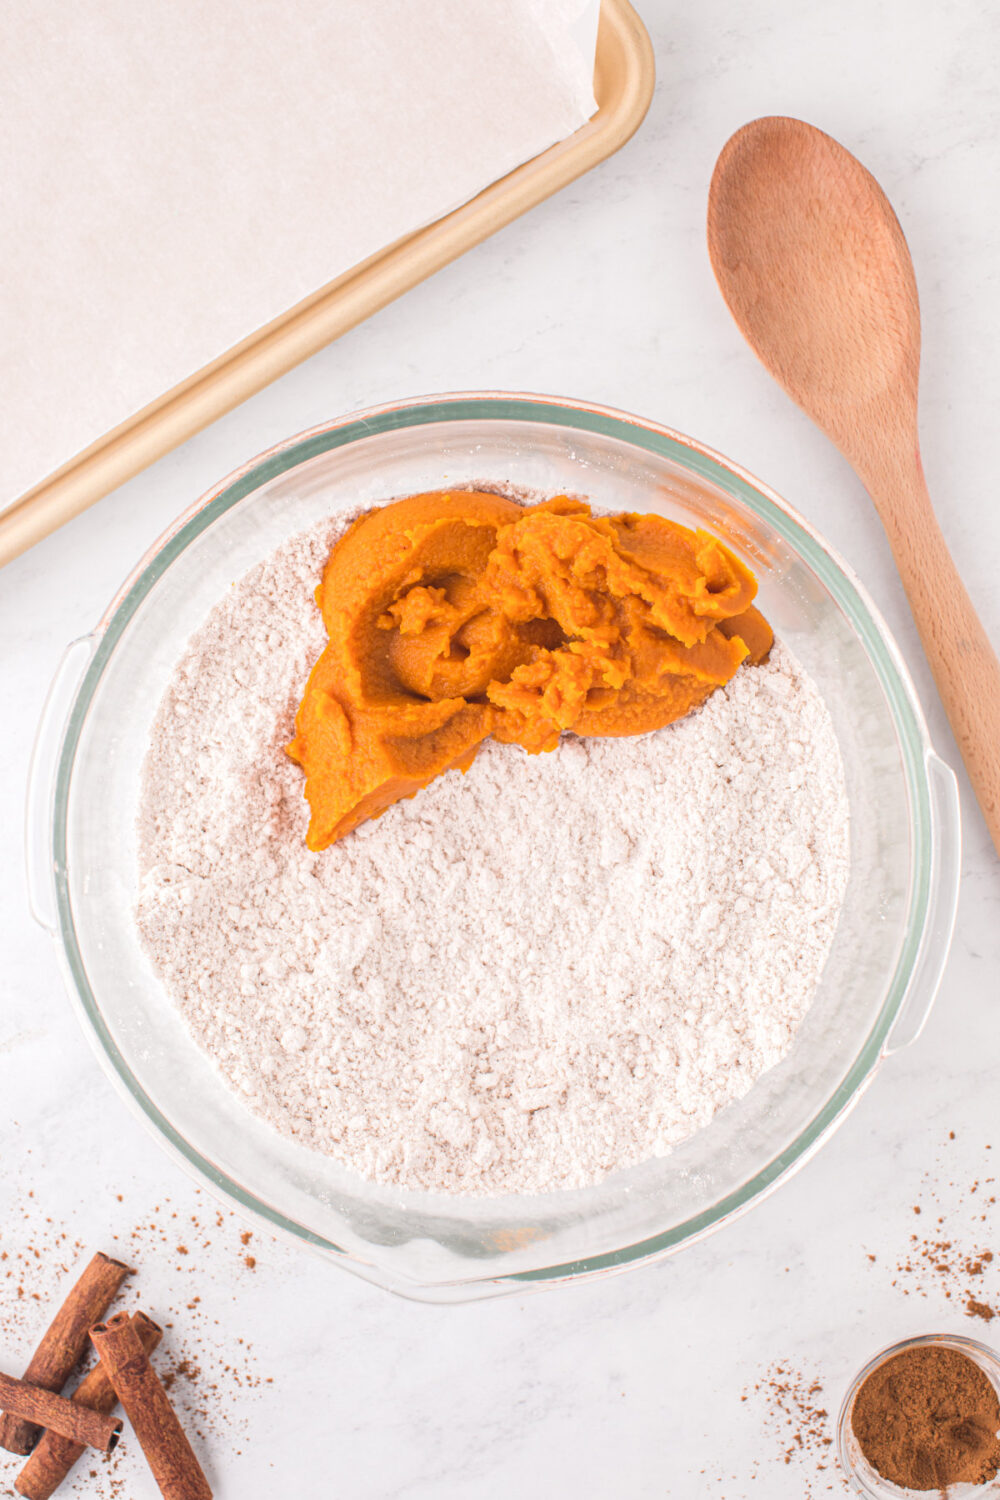 Pumpkin puree in a bowl of dry mix.